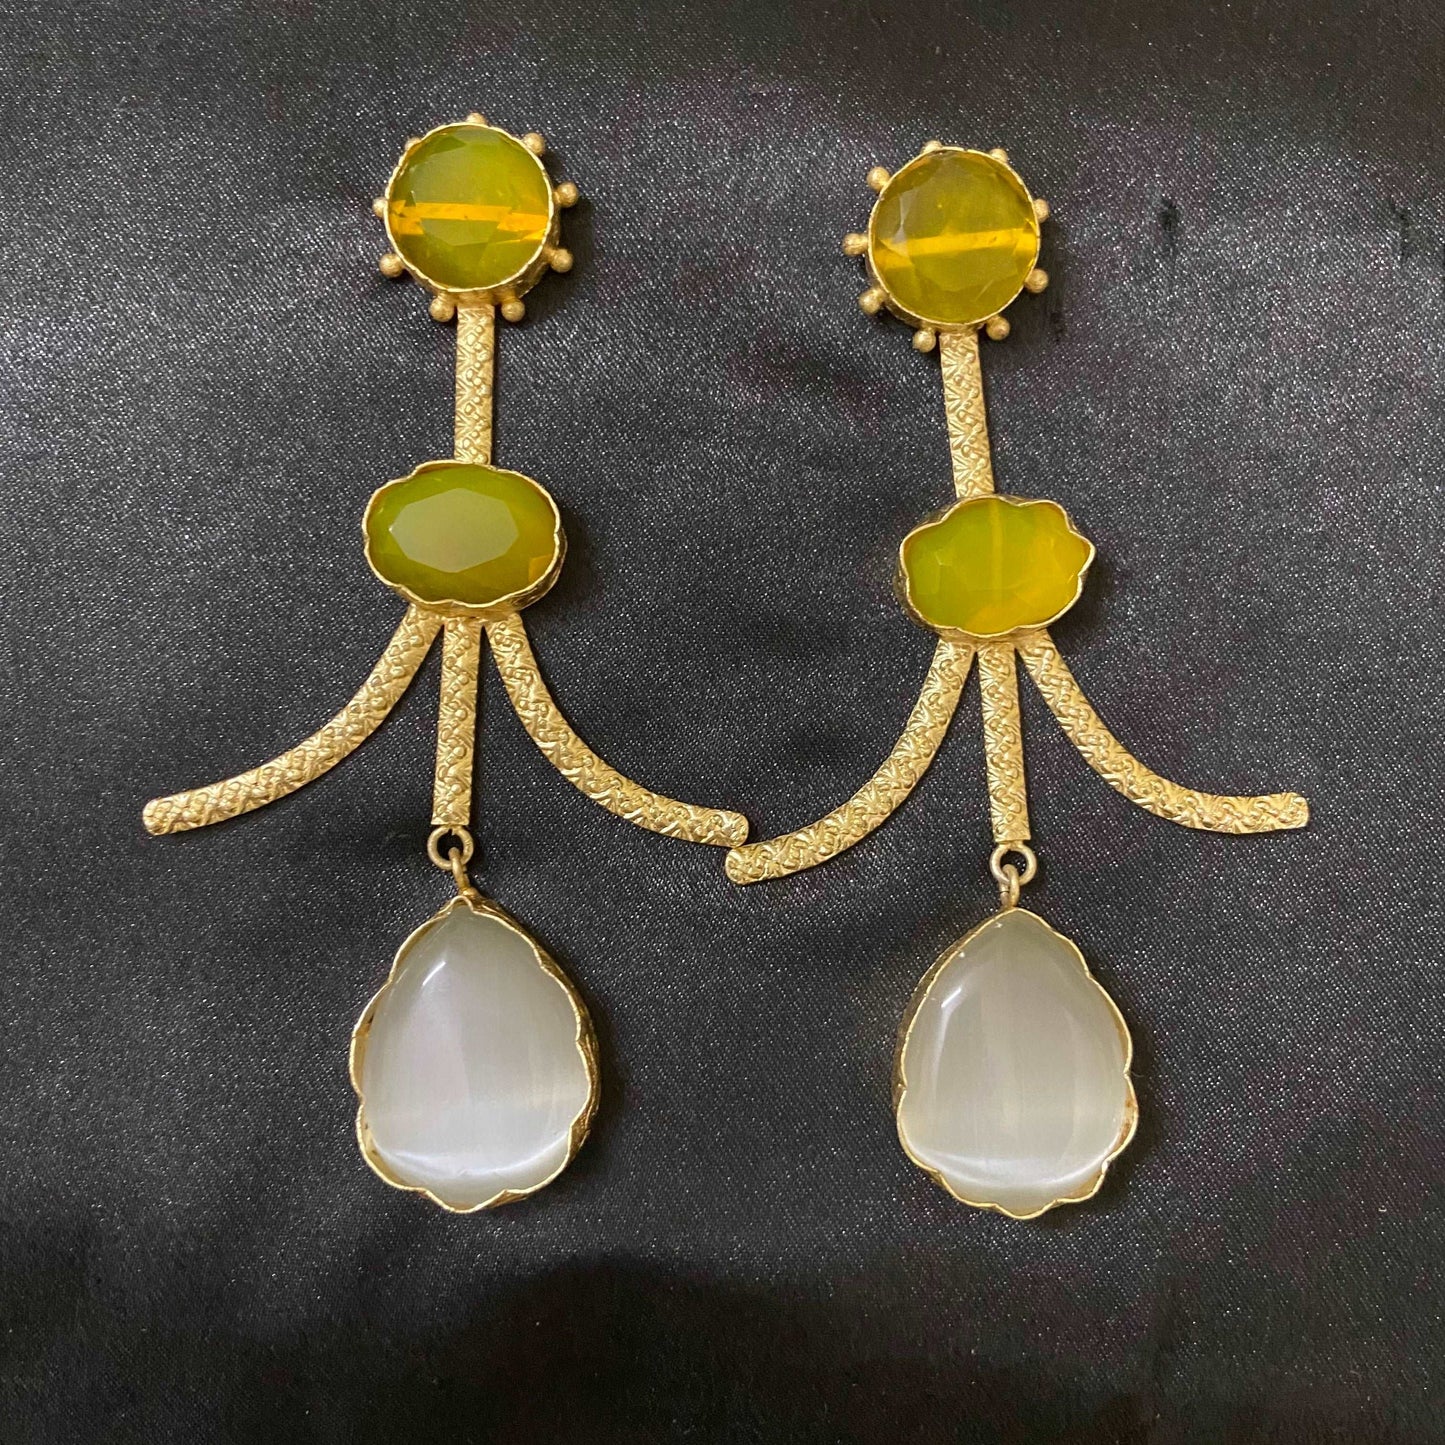 Contemporary earrings